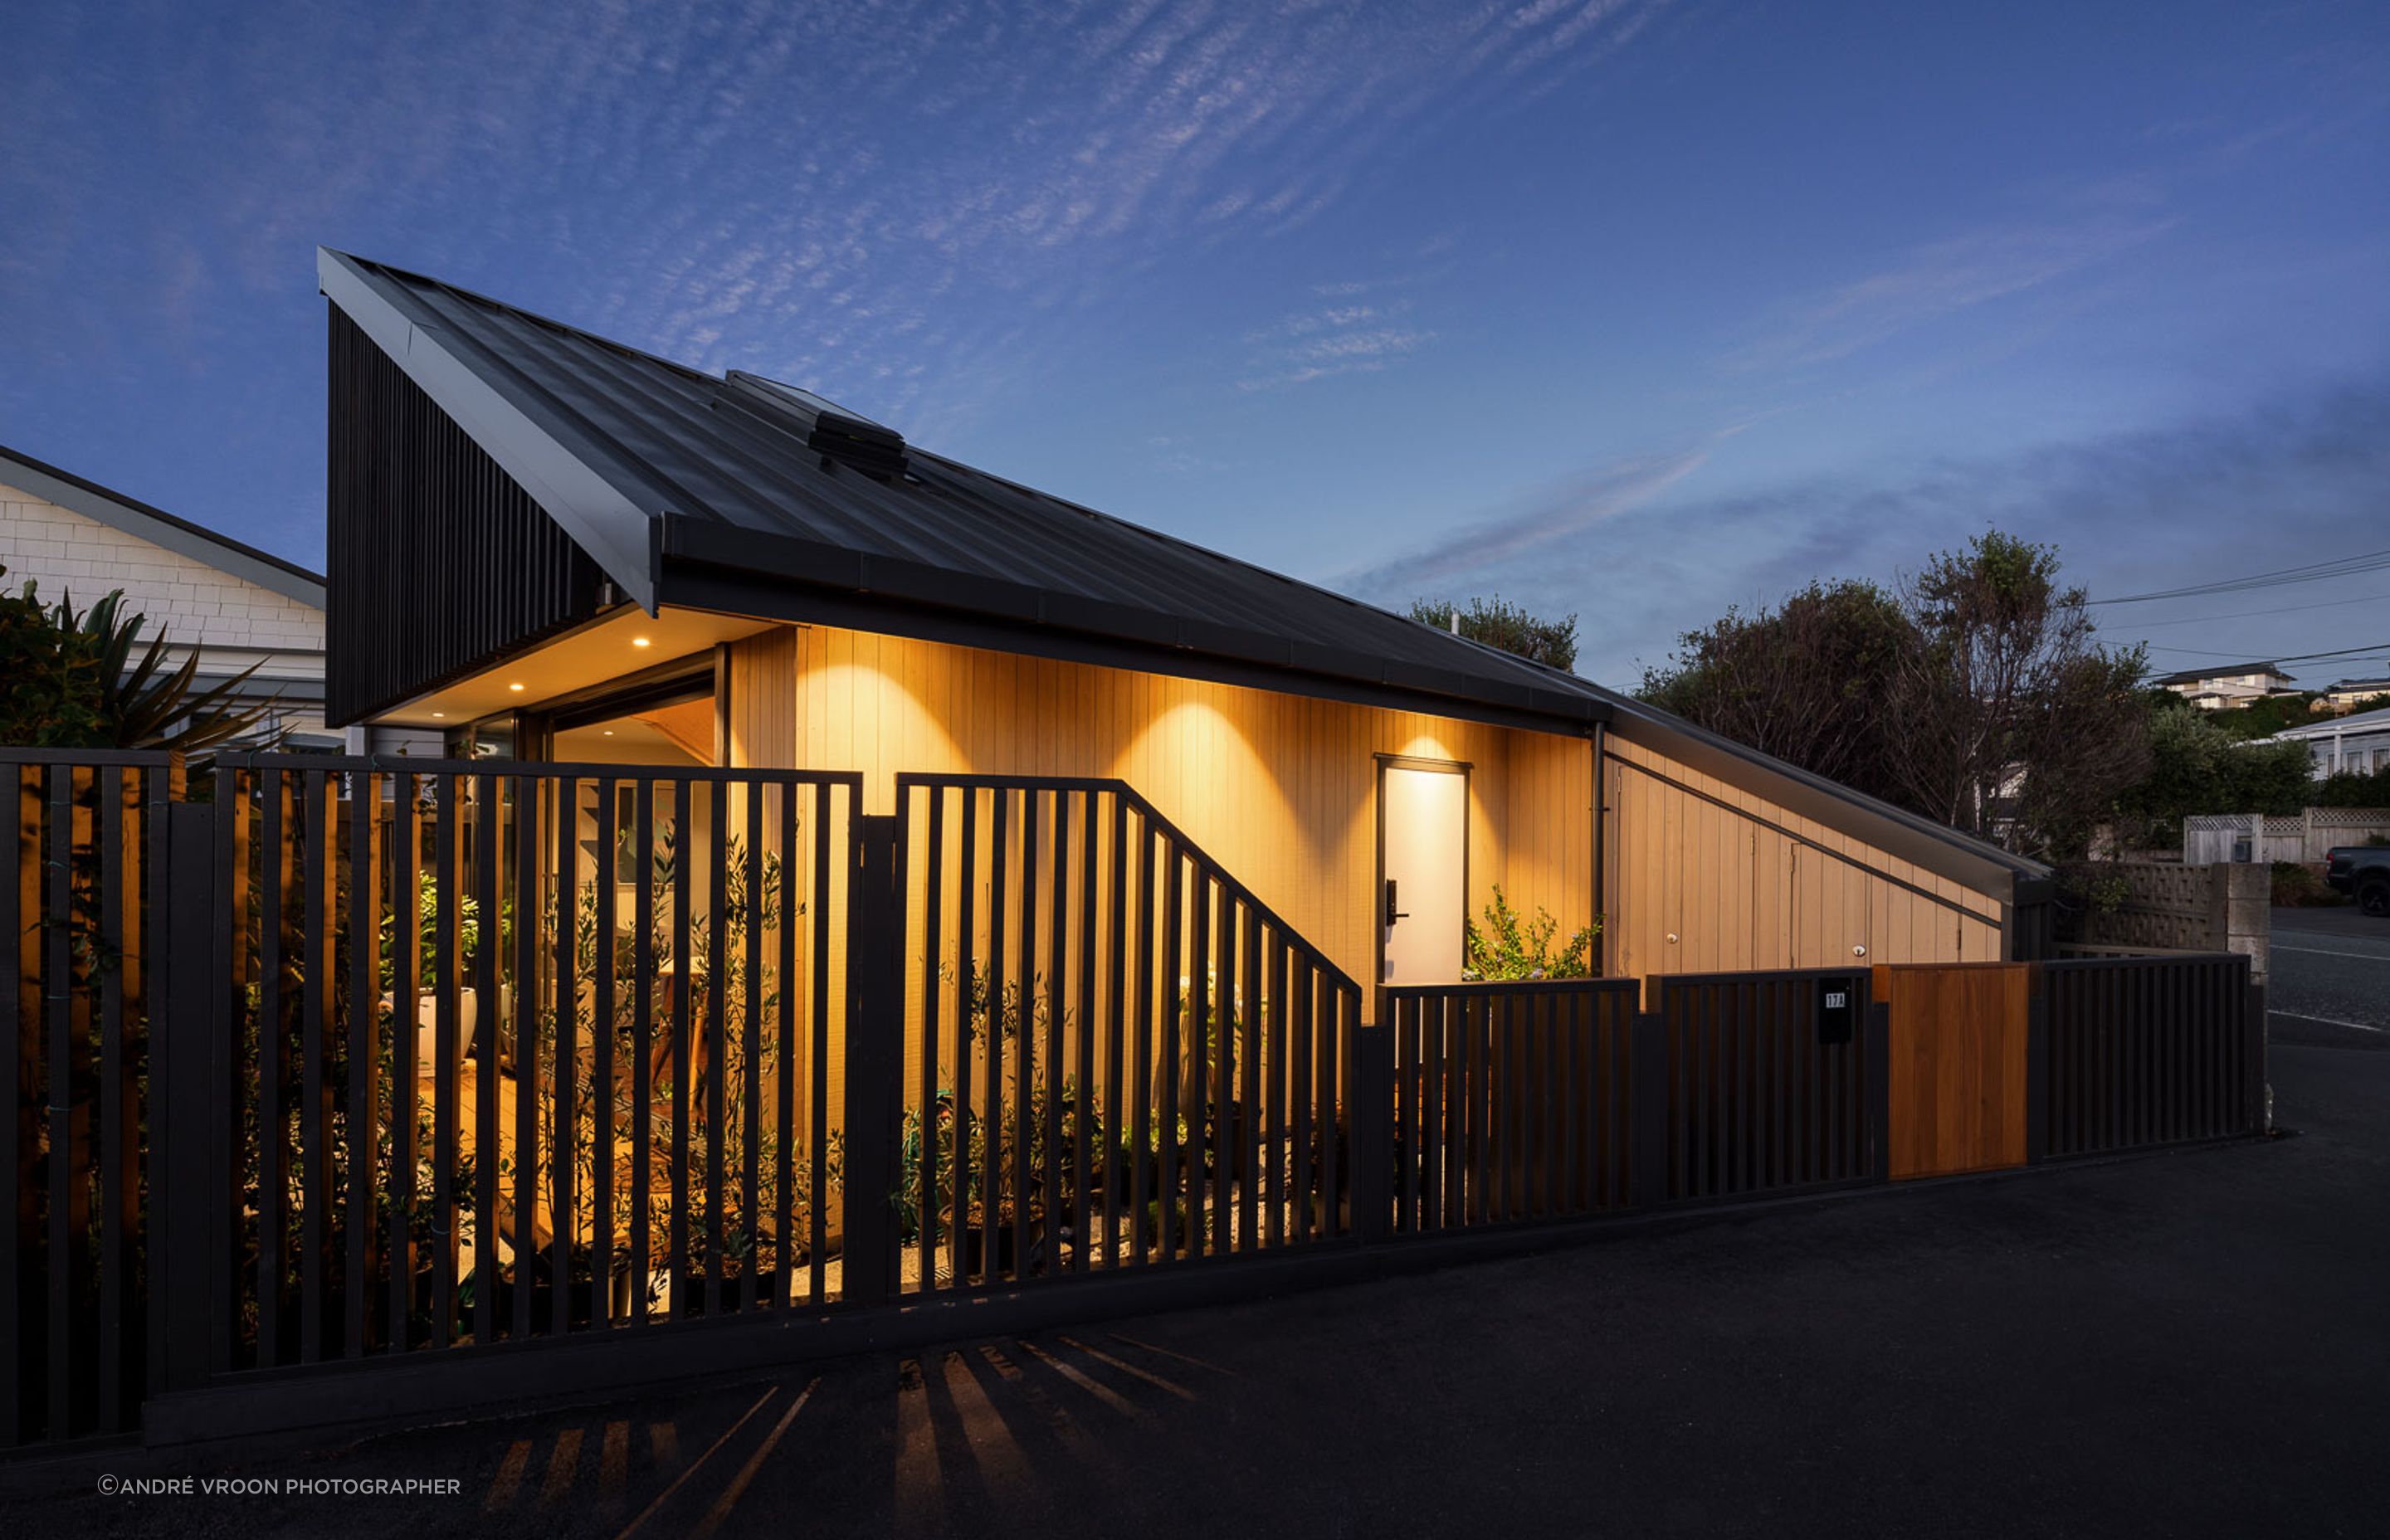 The warmth of the Abodo cladding contrasts sharply against the steel tray profile roof, and stained timber screens.